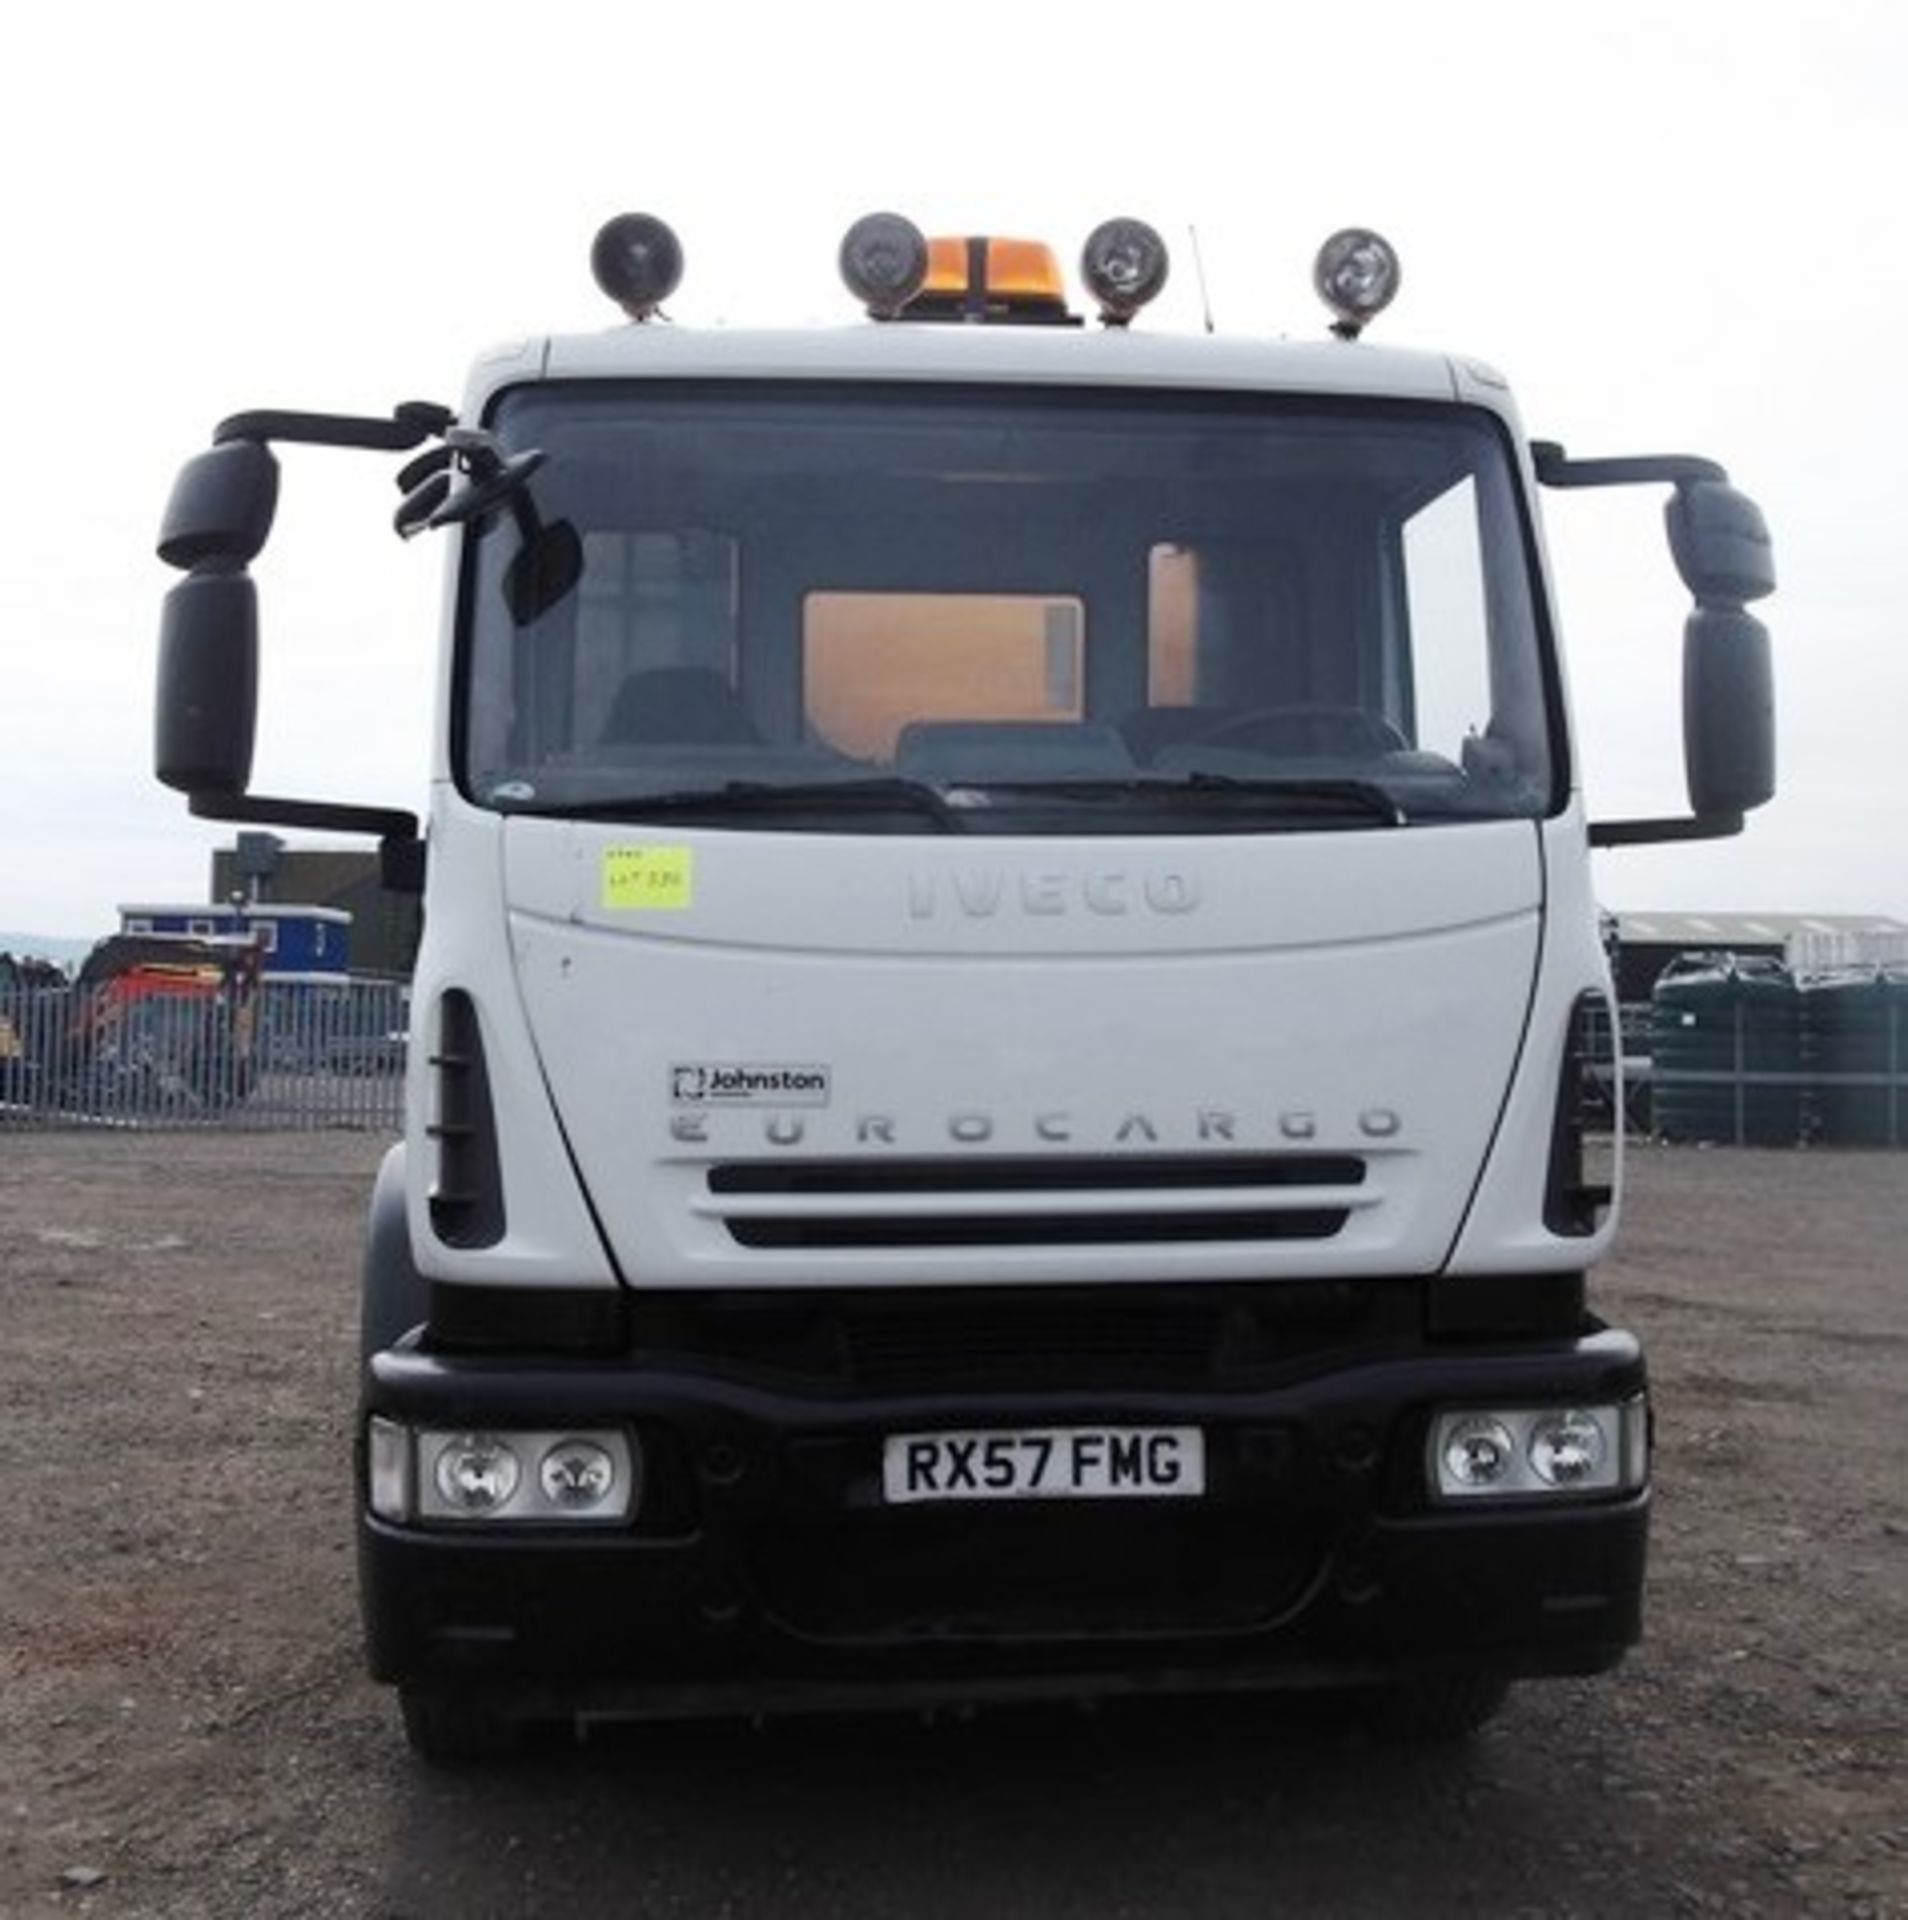 IVECO EUROCARGO - 5880cc
Body: 2 Dr Truck
Color: White
First Reg: 08/10/2007
Doors: 2
MOT: 
Mileage: - Image 10 of 11